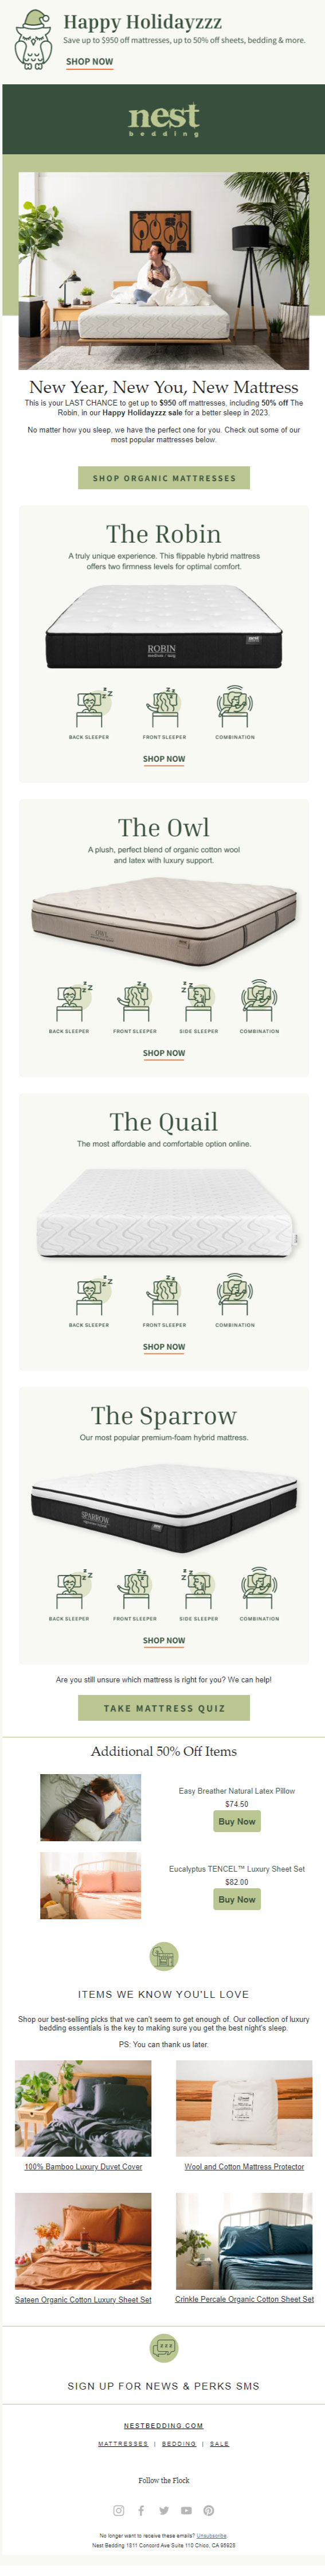 Nest Bedding- new year email